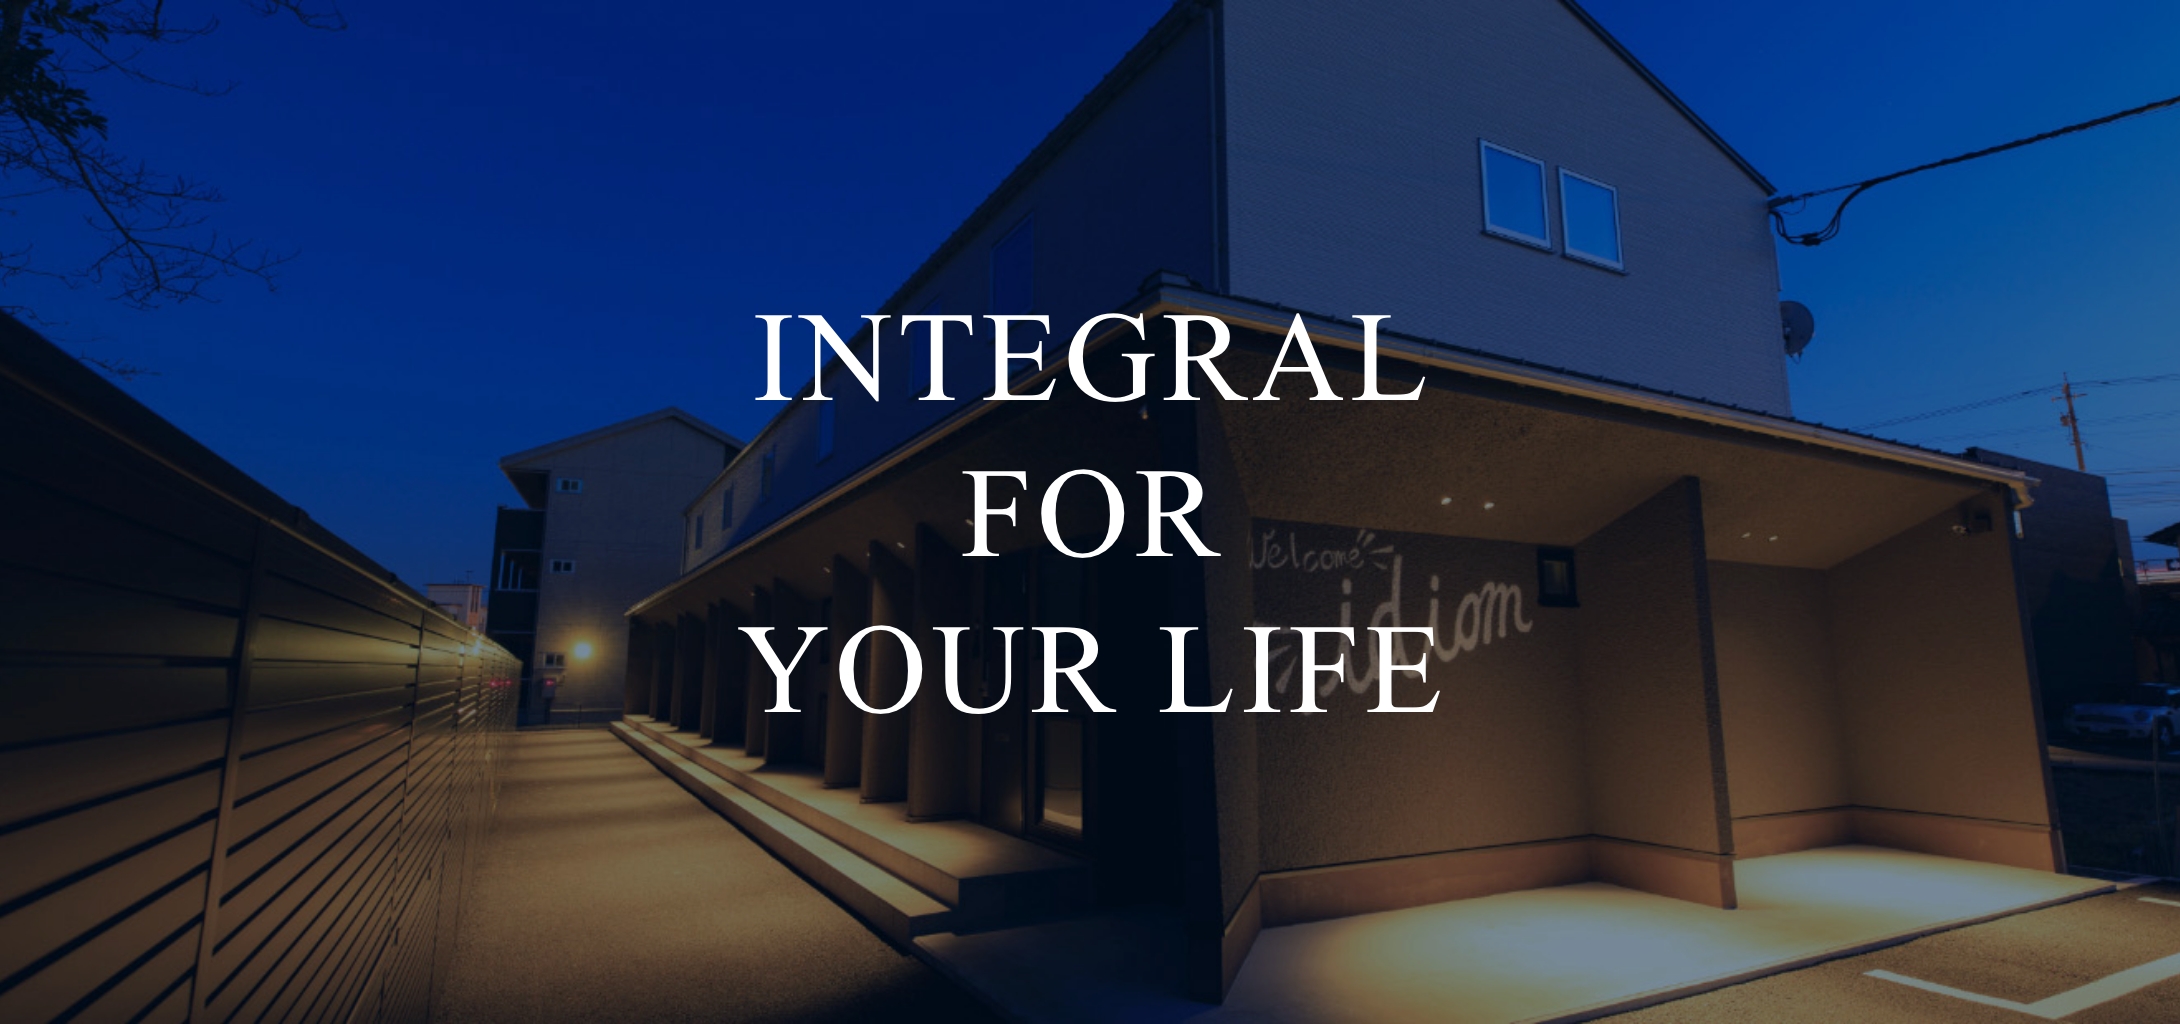 INTEGRAL FOR YOUR LIFE